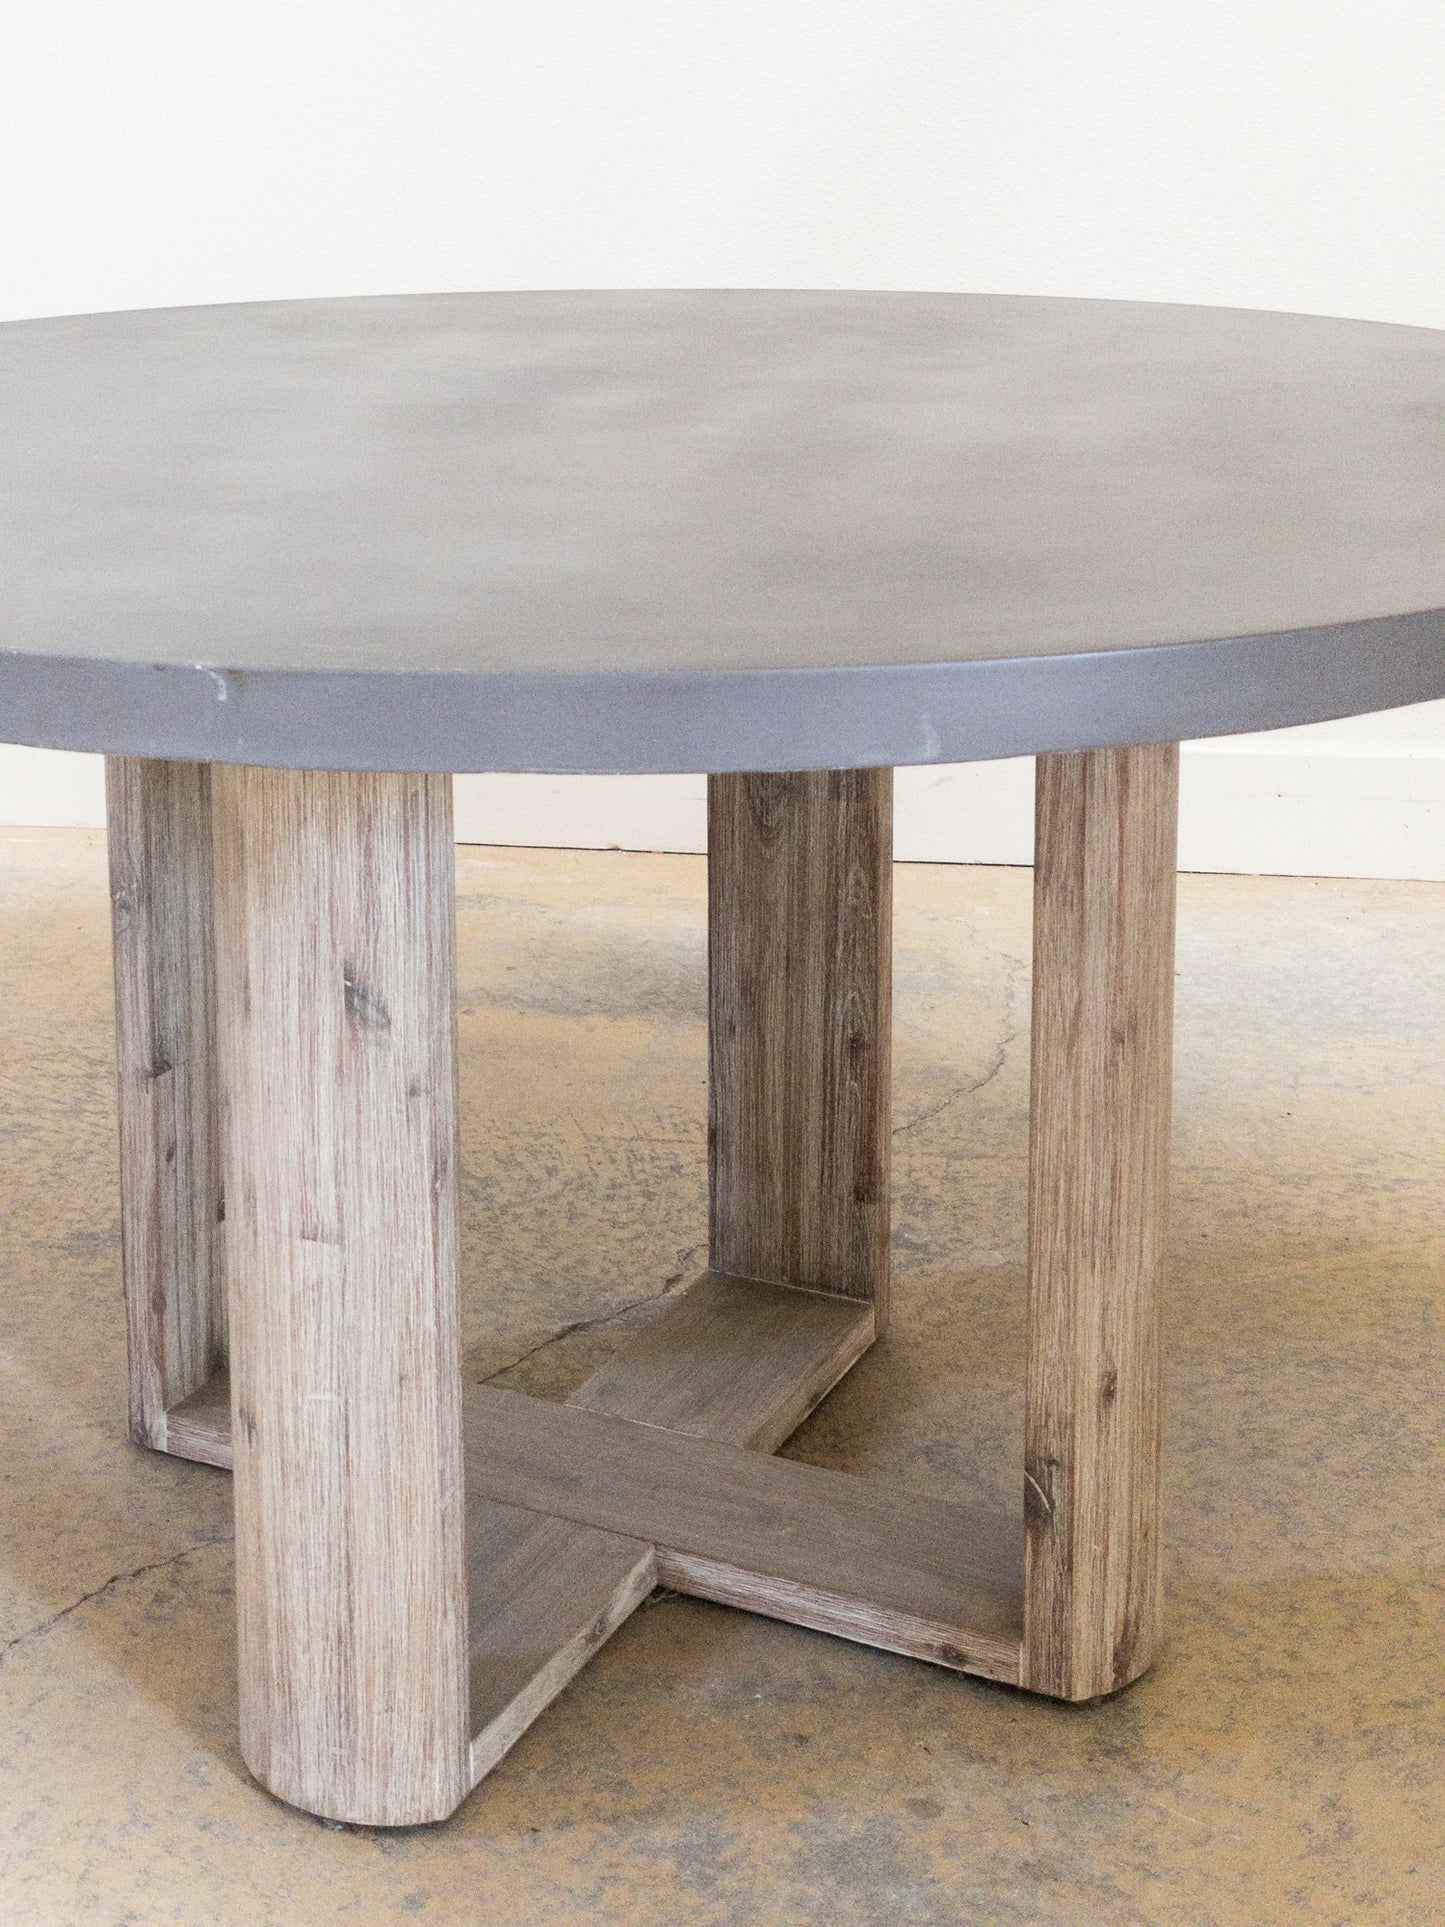 Concrete and Wood Table